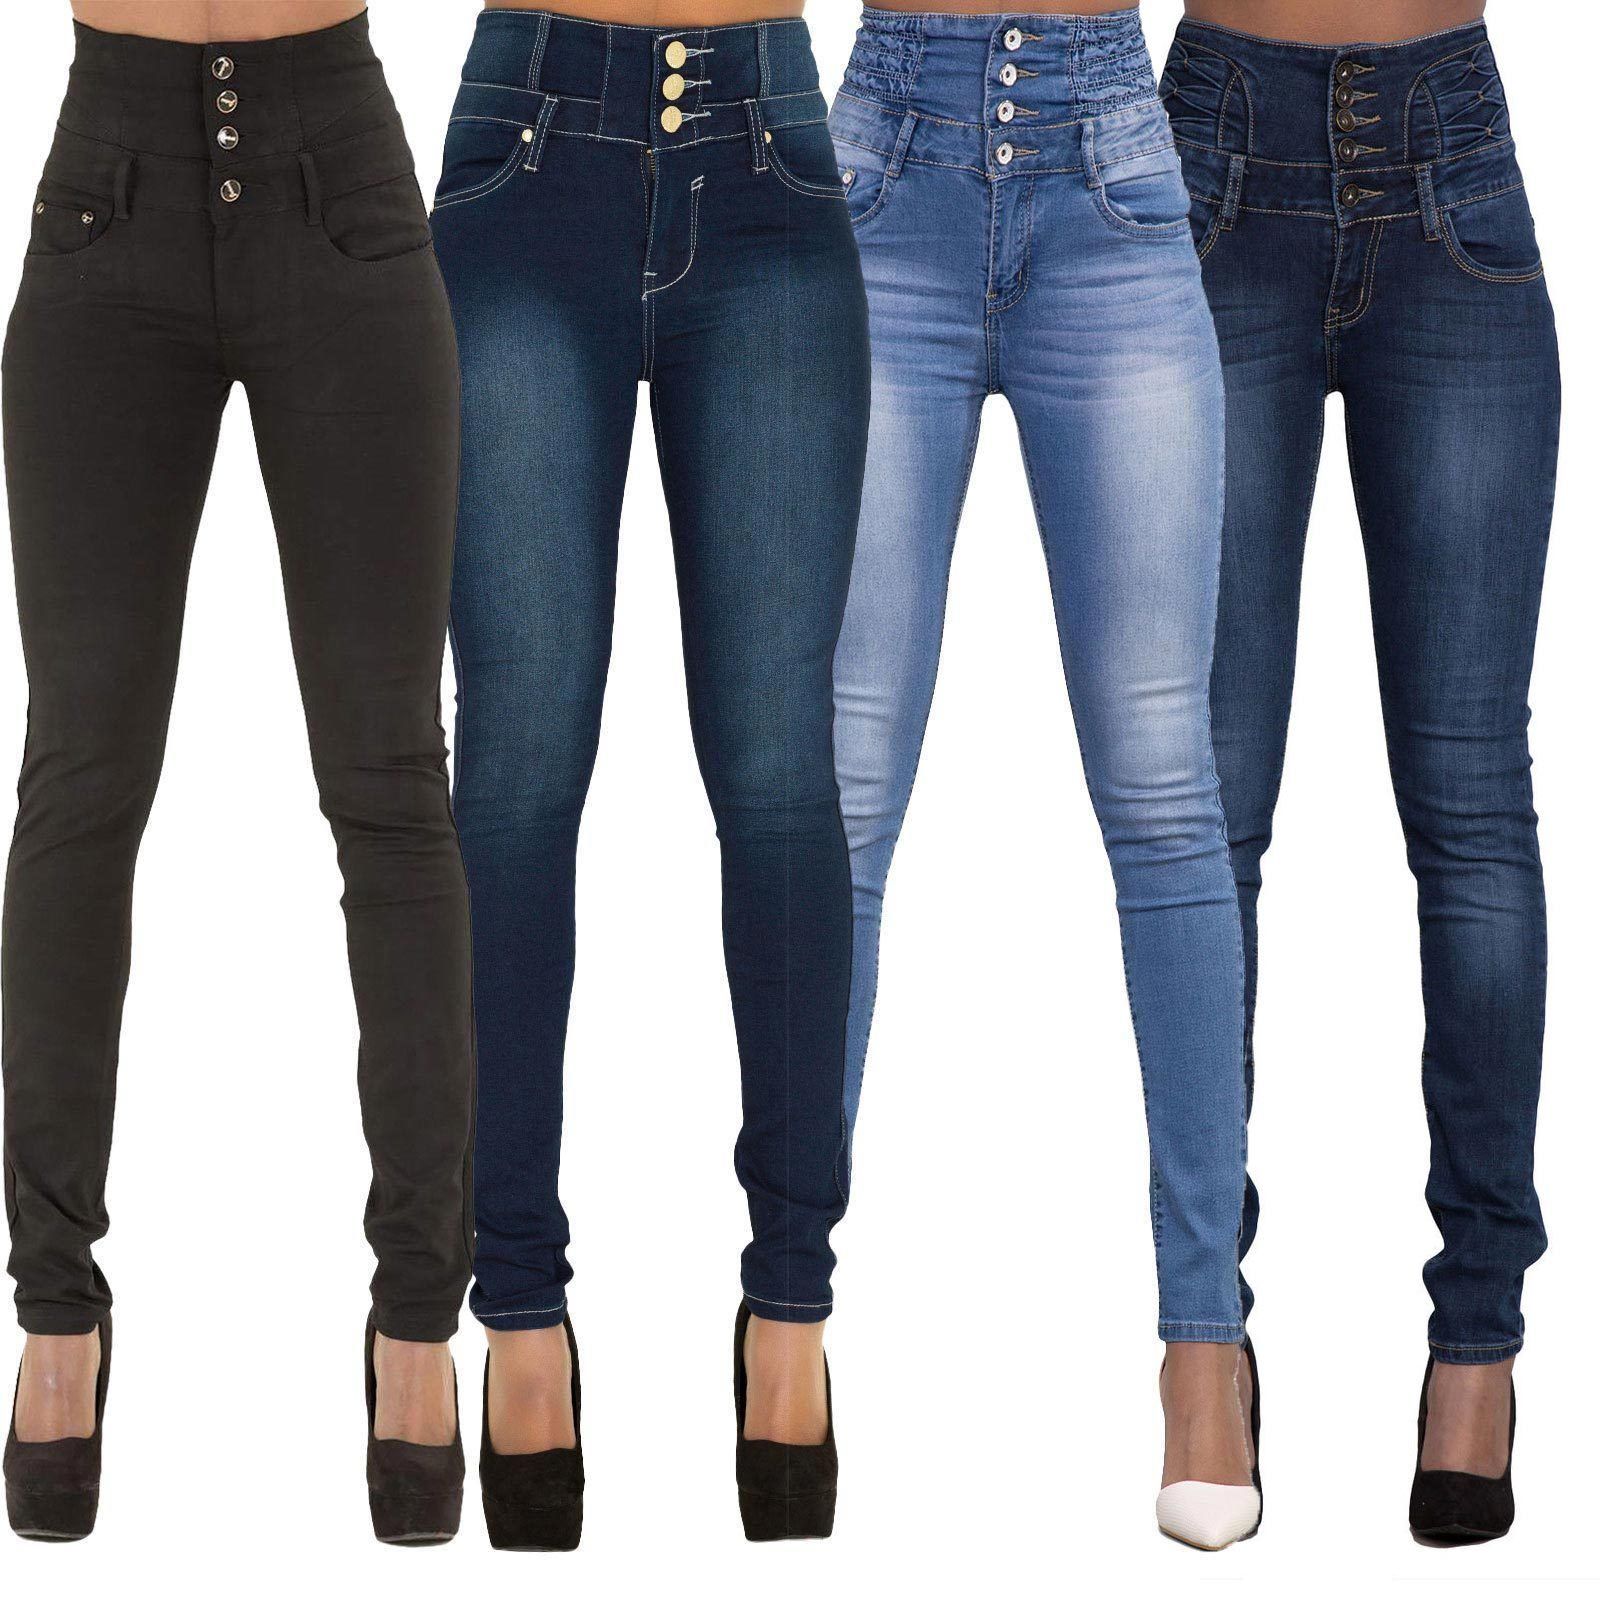 Skinny High Waist Jeans - 200000361 Find Epic Store